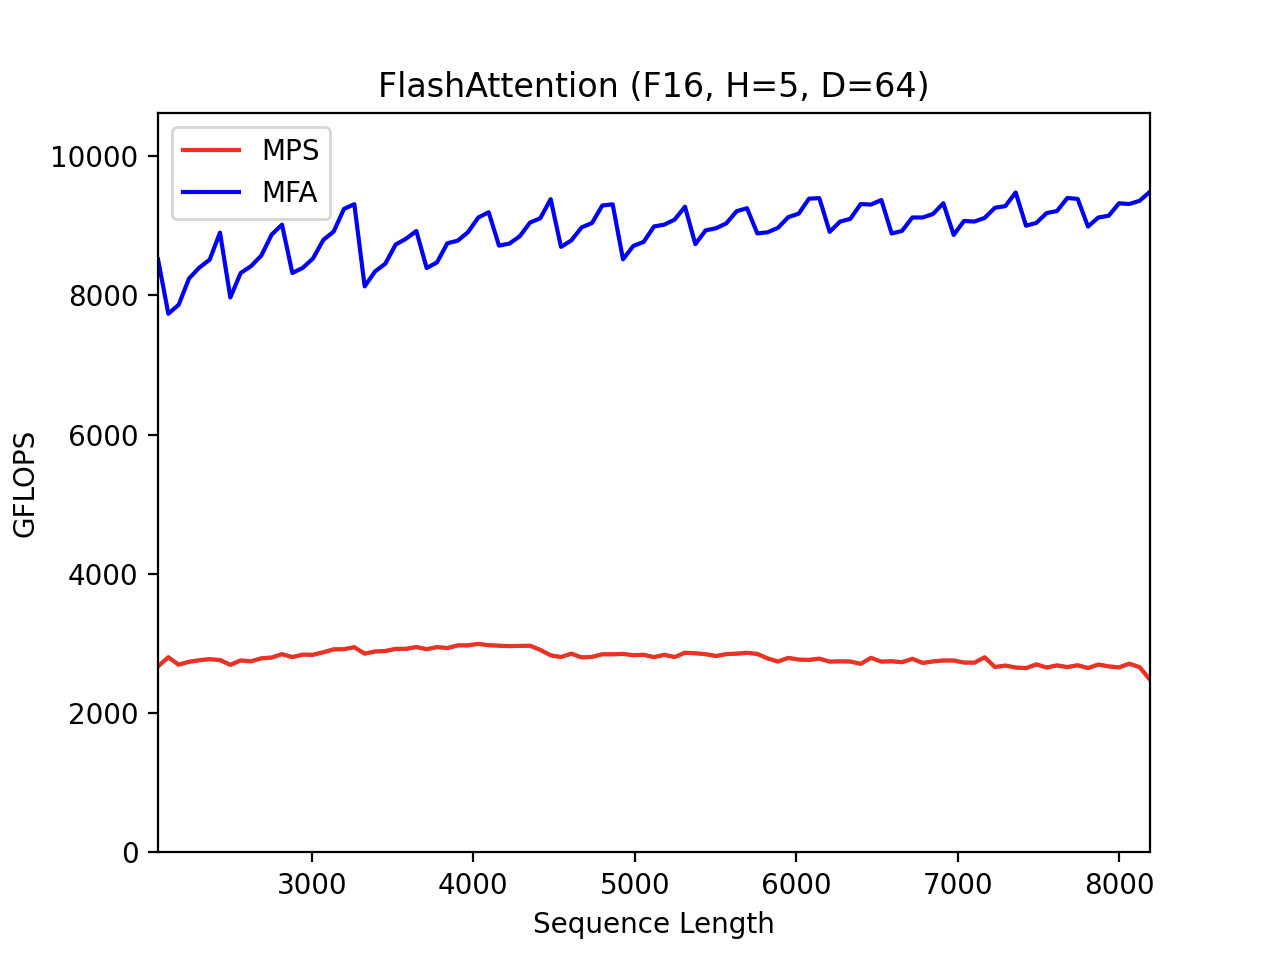 FlashAttention (F16, H=5, D=64)